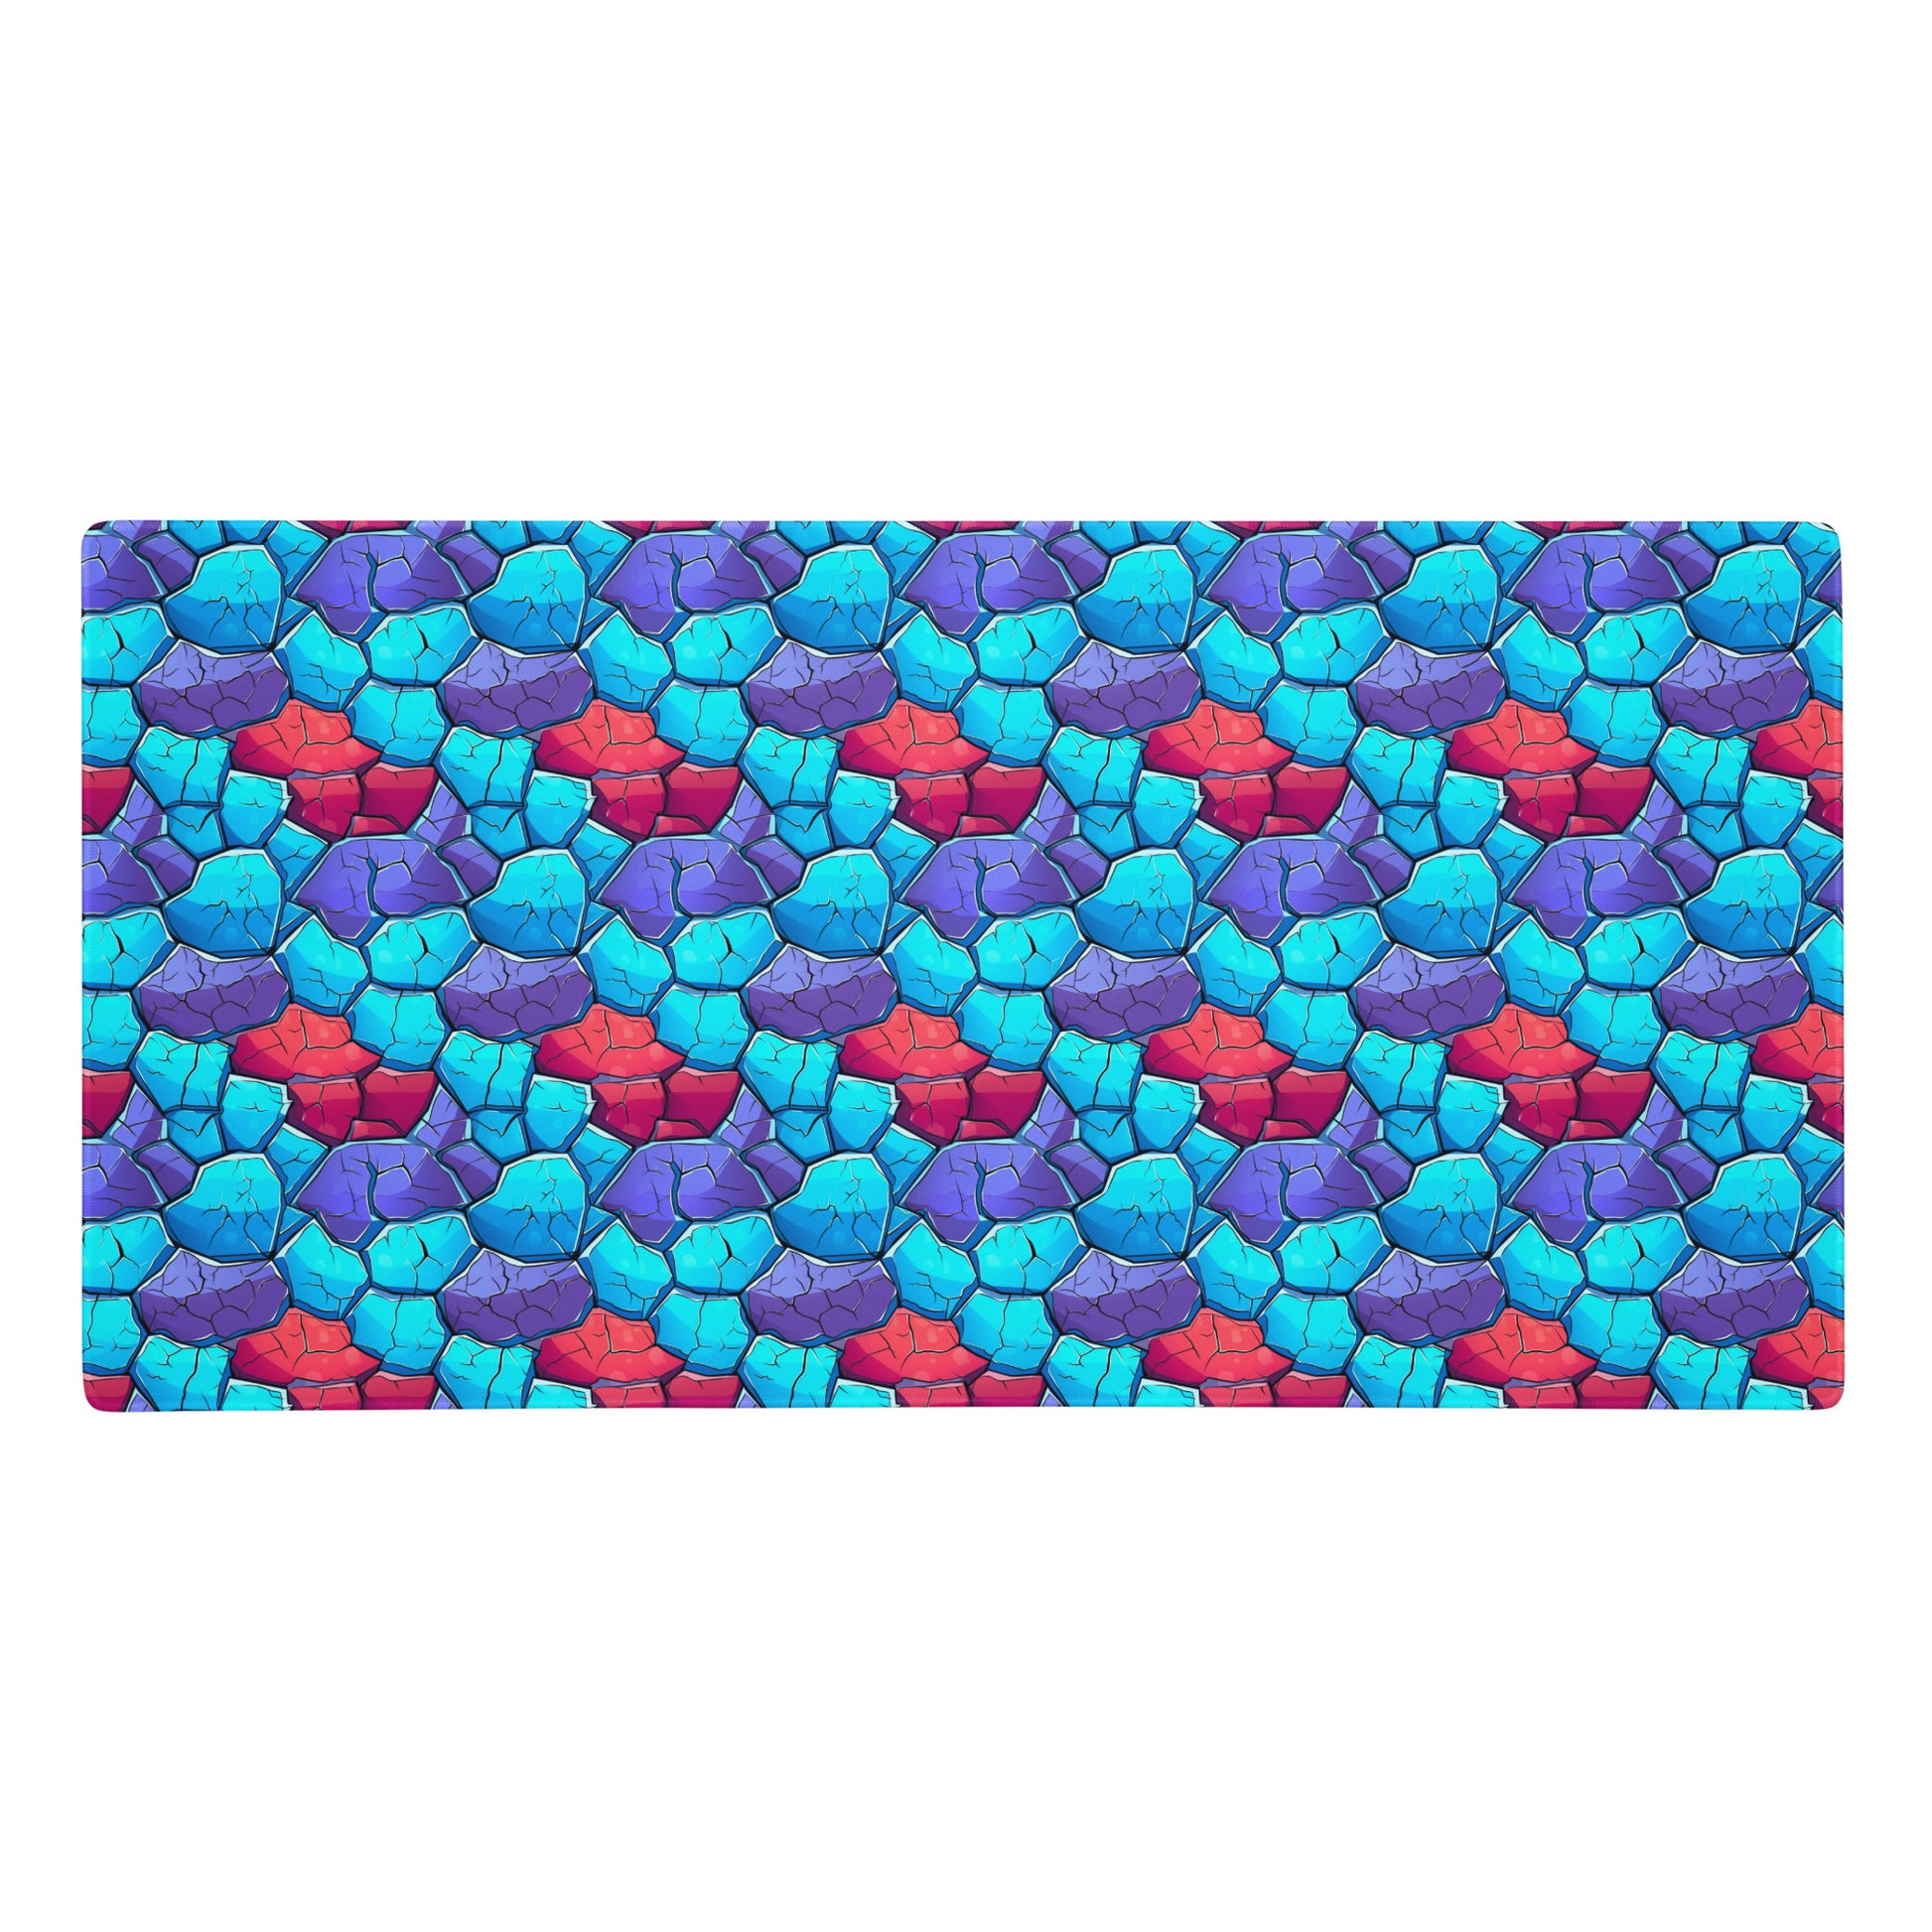 A 36" x 18" gaming desk pad with blue, red, and purple crystals.